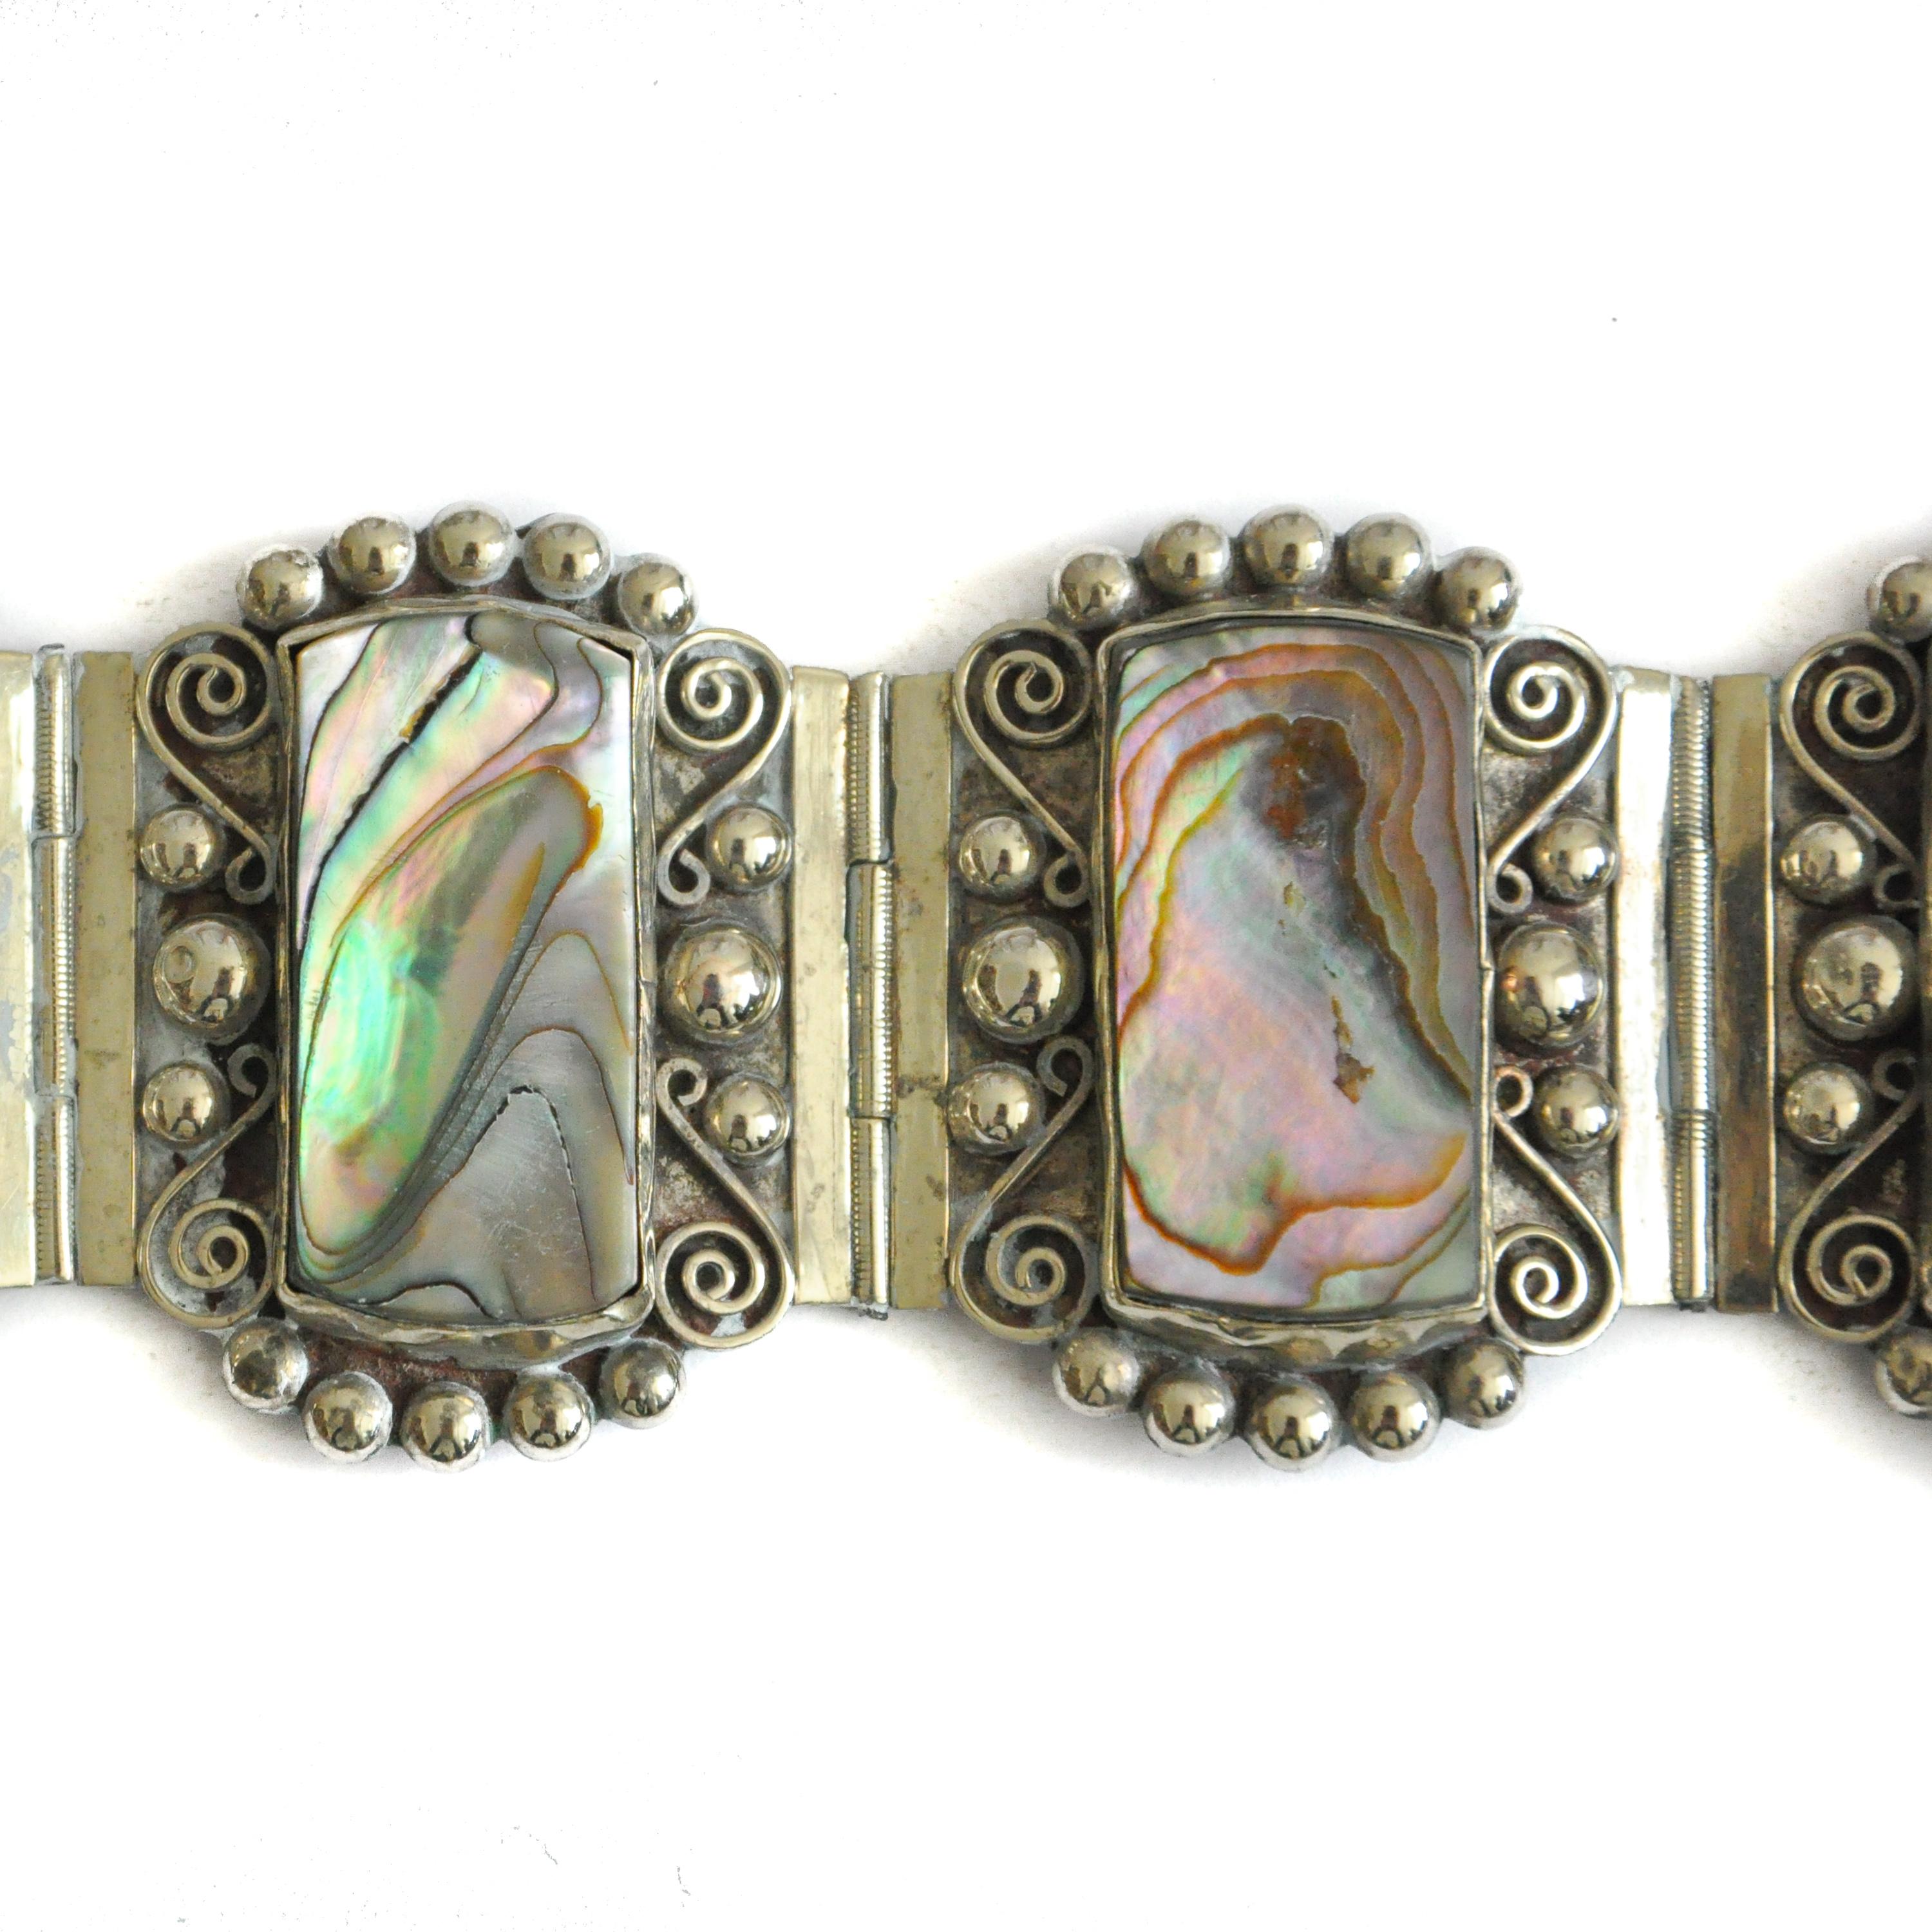 A beautiful mid-century Mexican bracelet comprised of fine sterling silver with abalone shell. The bracelet has five decorative silver panels, with heavy beading, swirls and rectangular abalone stone mask medallion - the stone has beautiful pearl